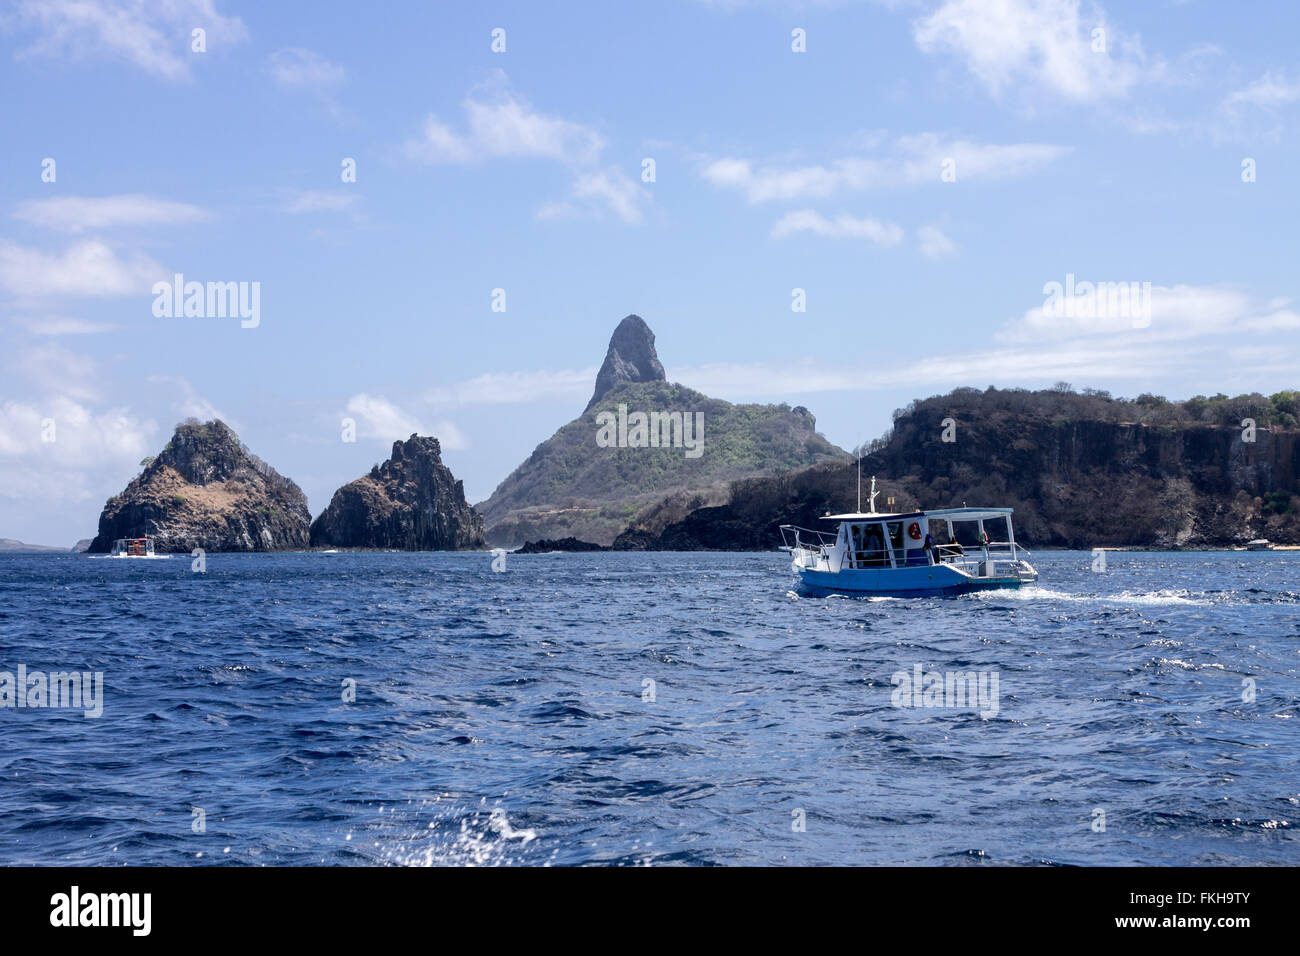 Two Brothers, Pico Hill and the waters of Fernando de Noronha, Brazil. Stock Photo